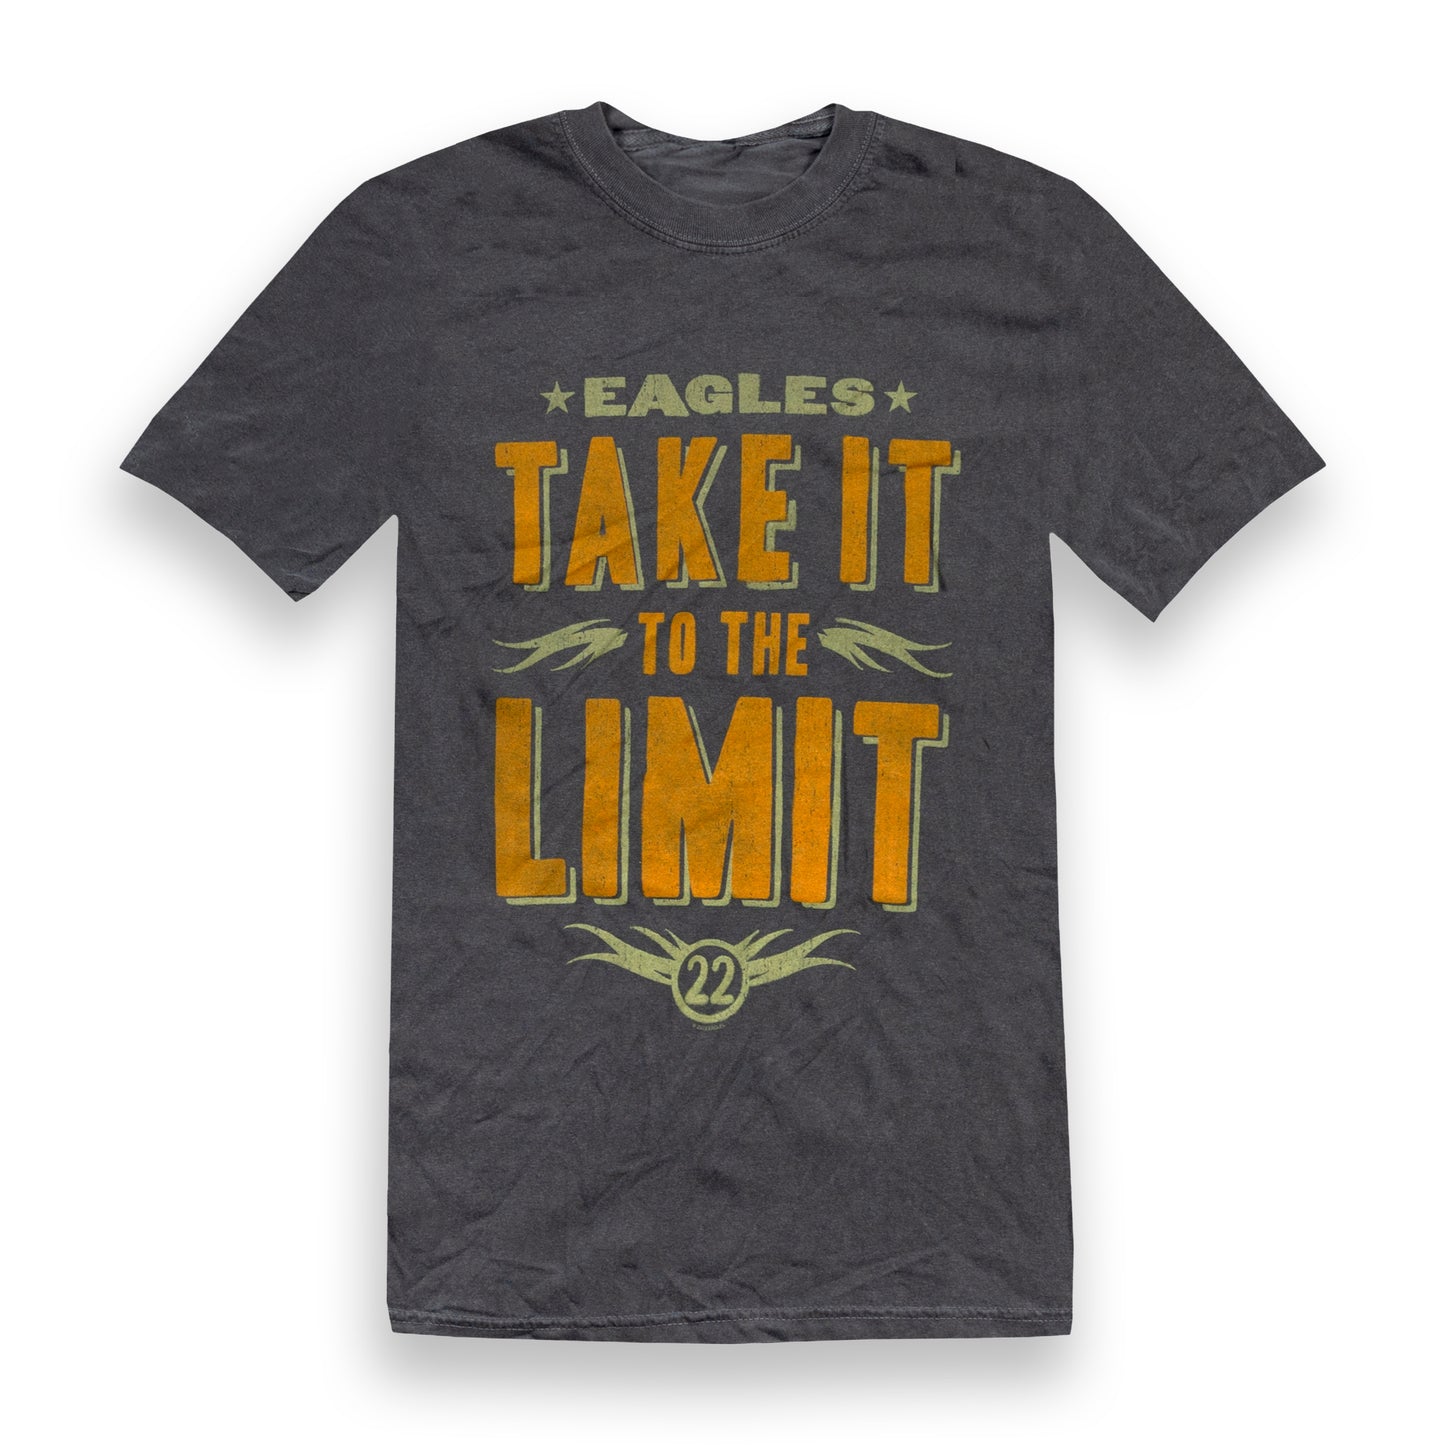 Take It To The Limit Tee